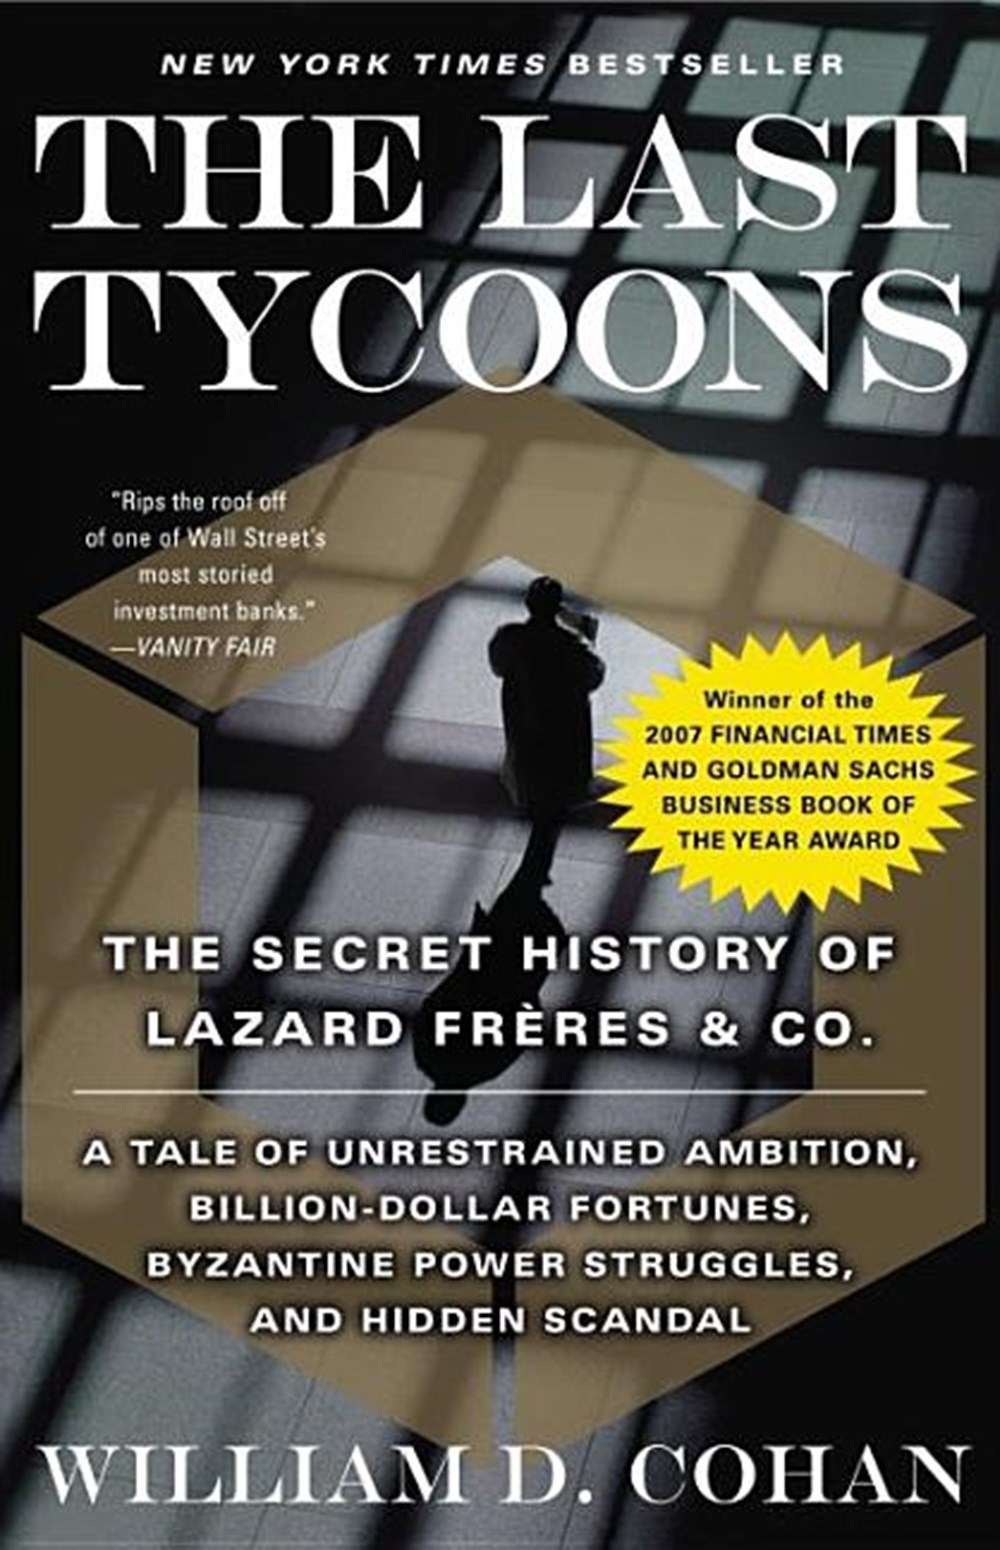 Last Tycoons The Secret History of Lazard Fr?res & Co.